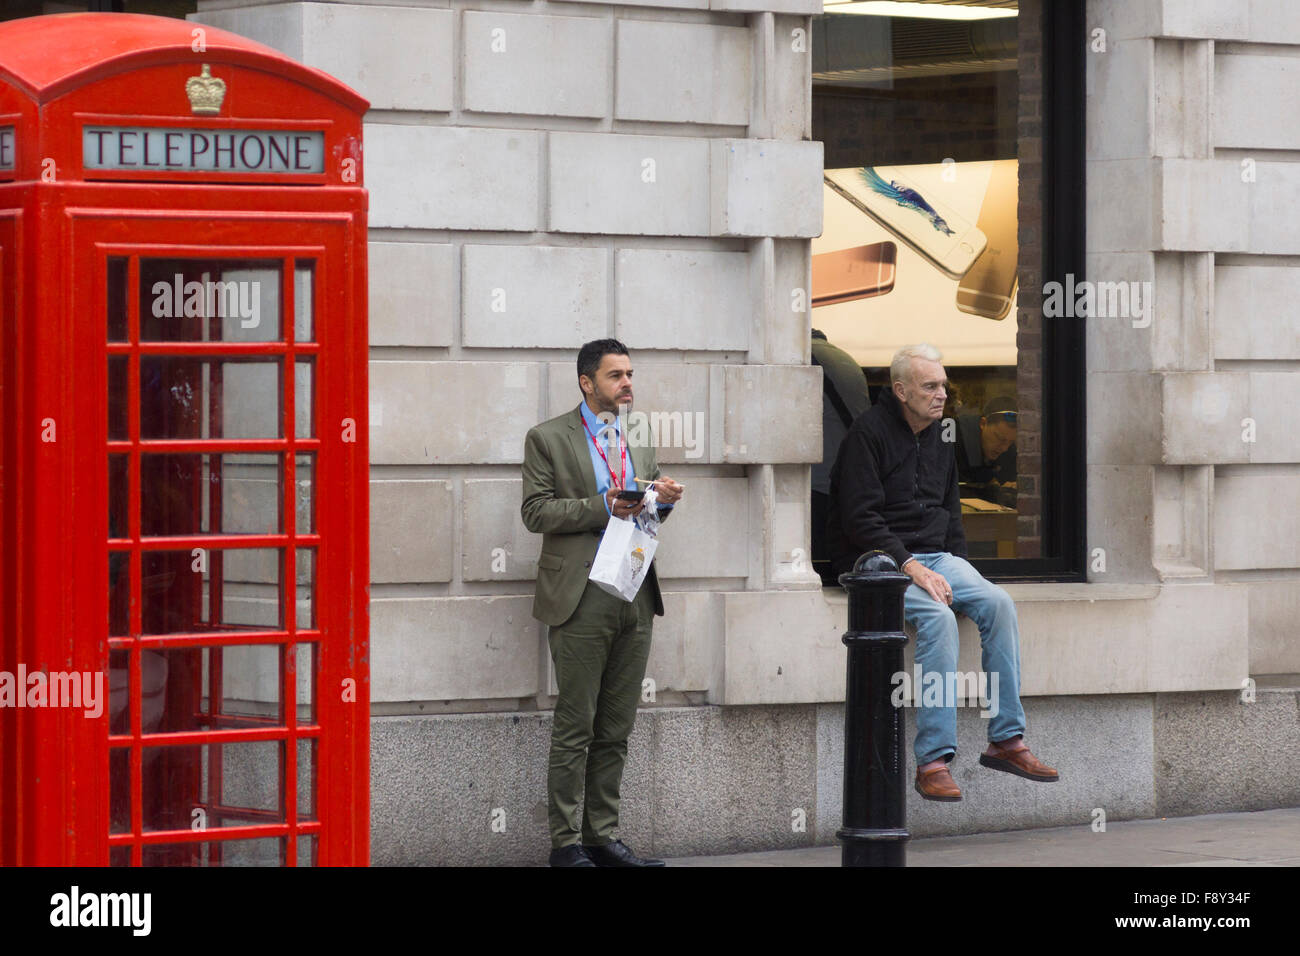 A man eating lunch standing up and a man sitting down smoking in London Stock Photo